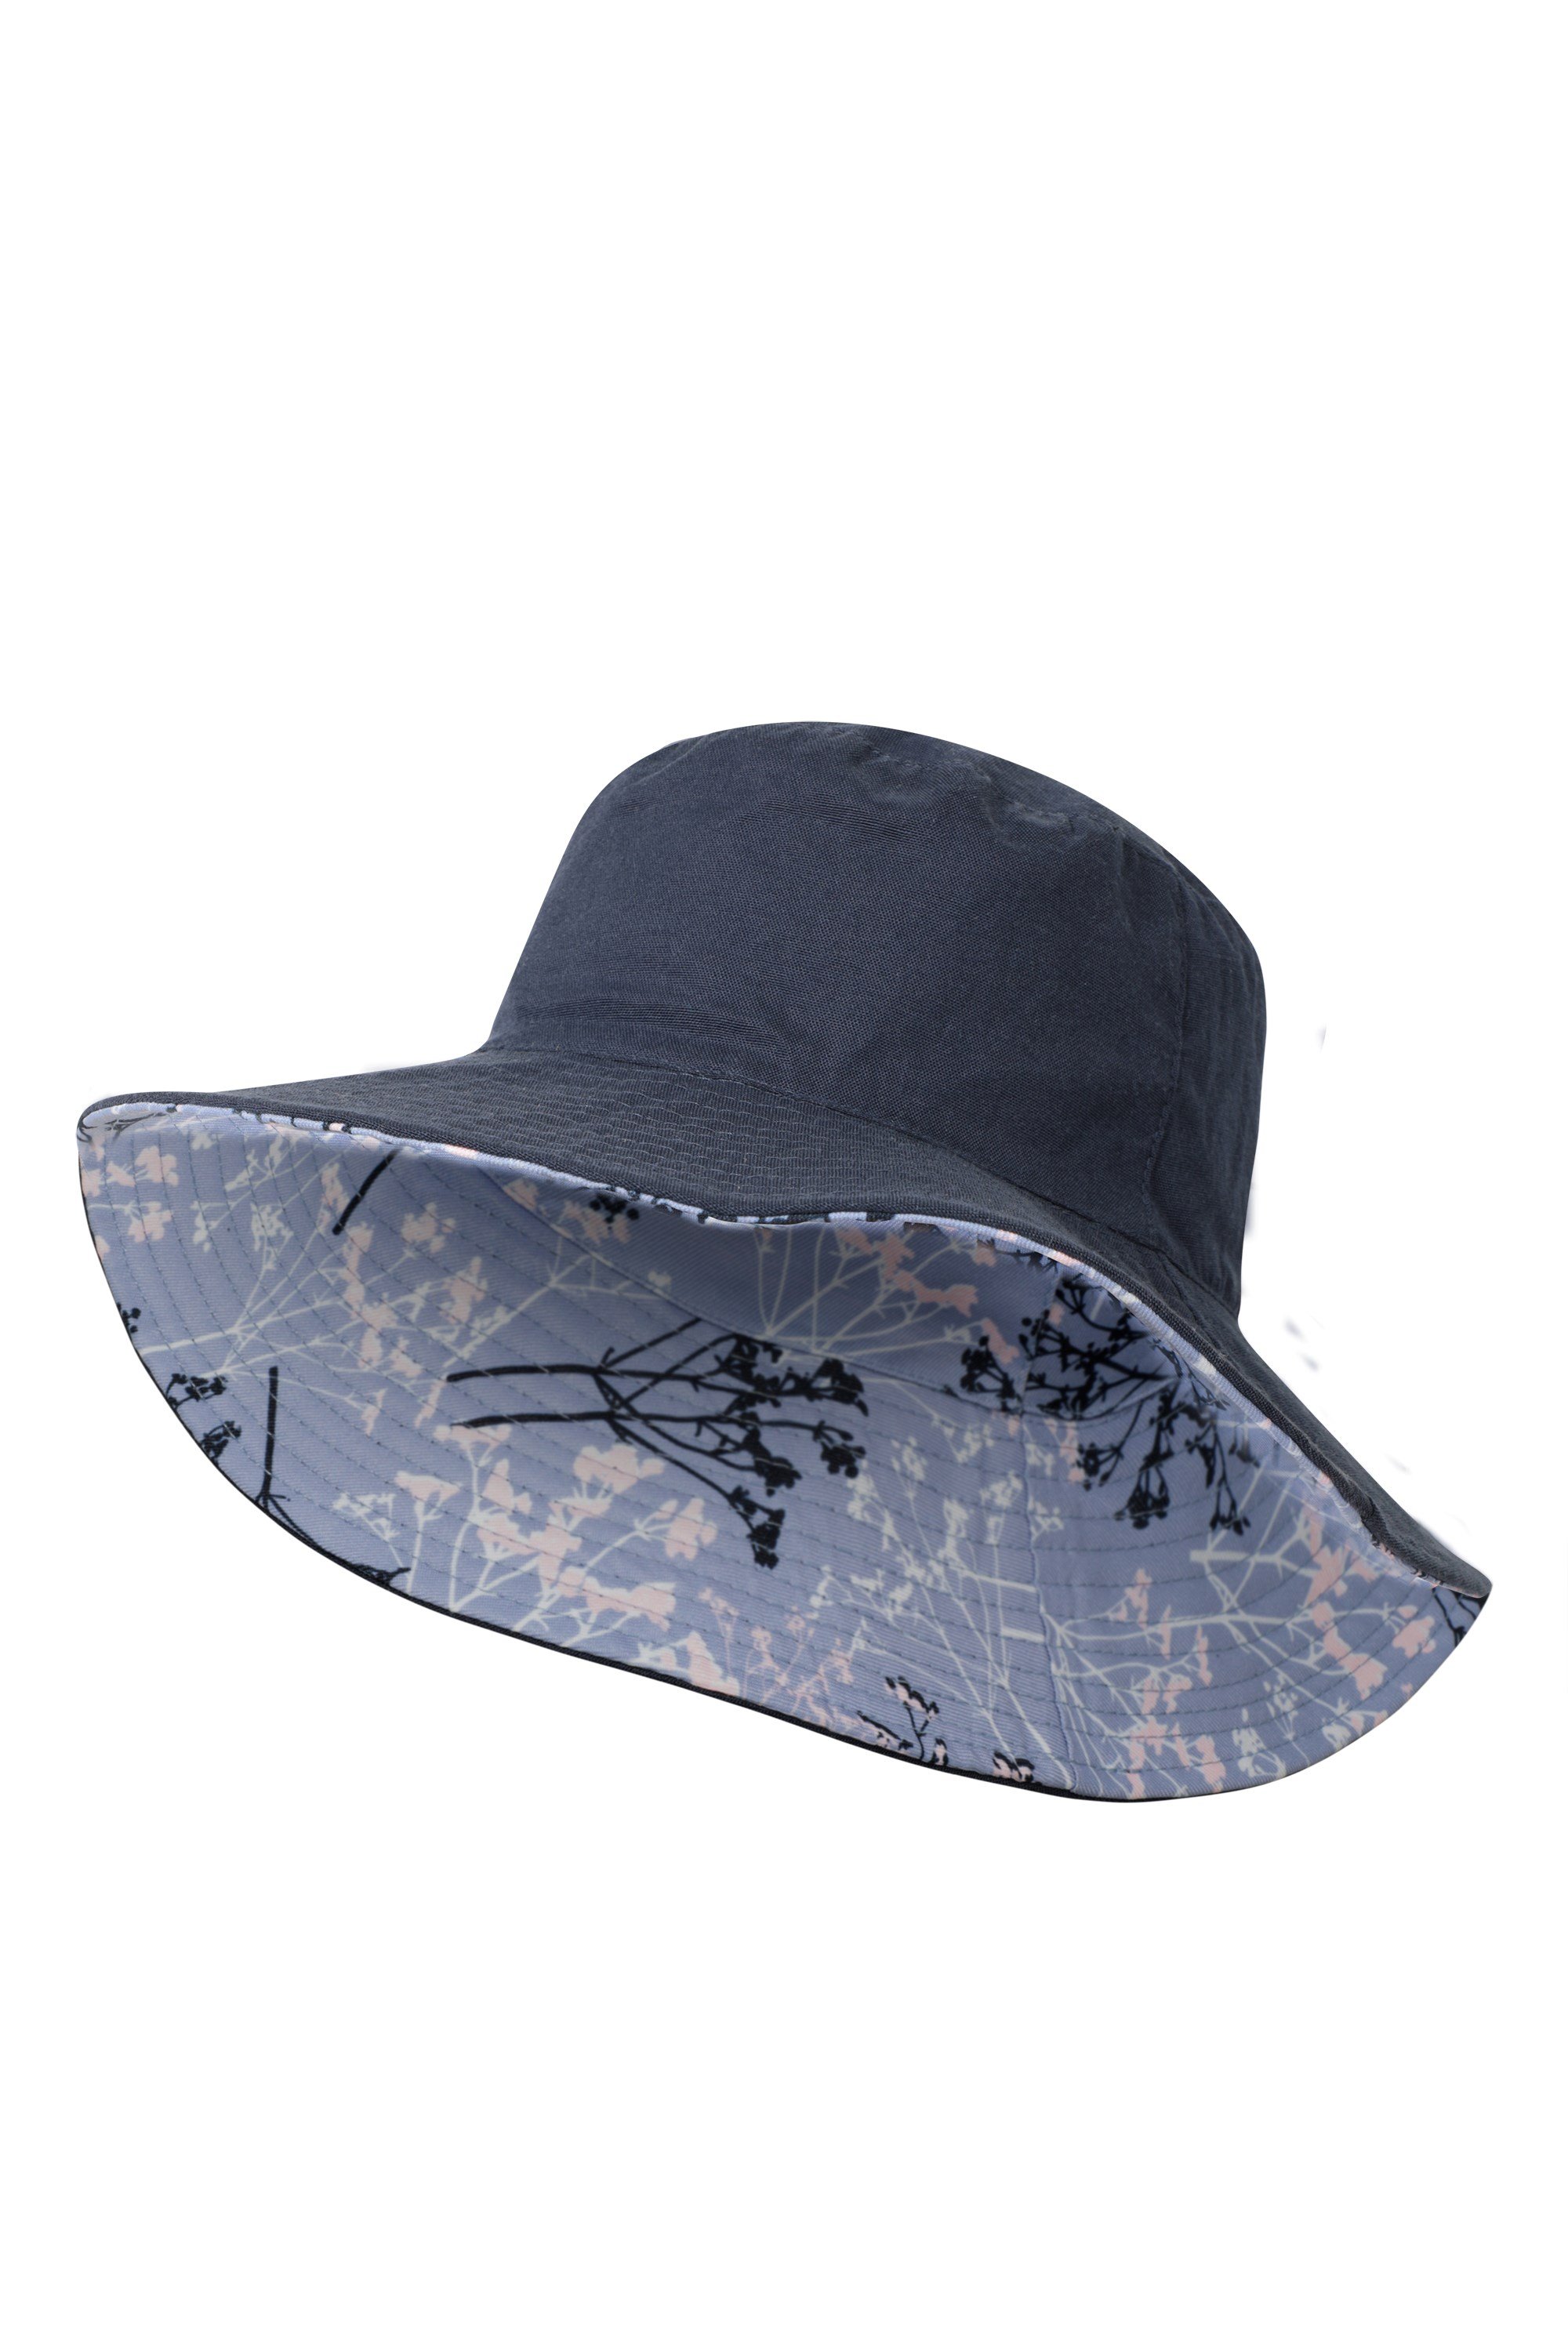 Mountain Warehouse Reversible Womens Printed Sun Hat - Navy | Size One